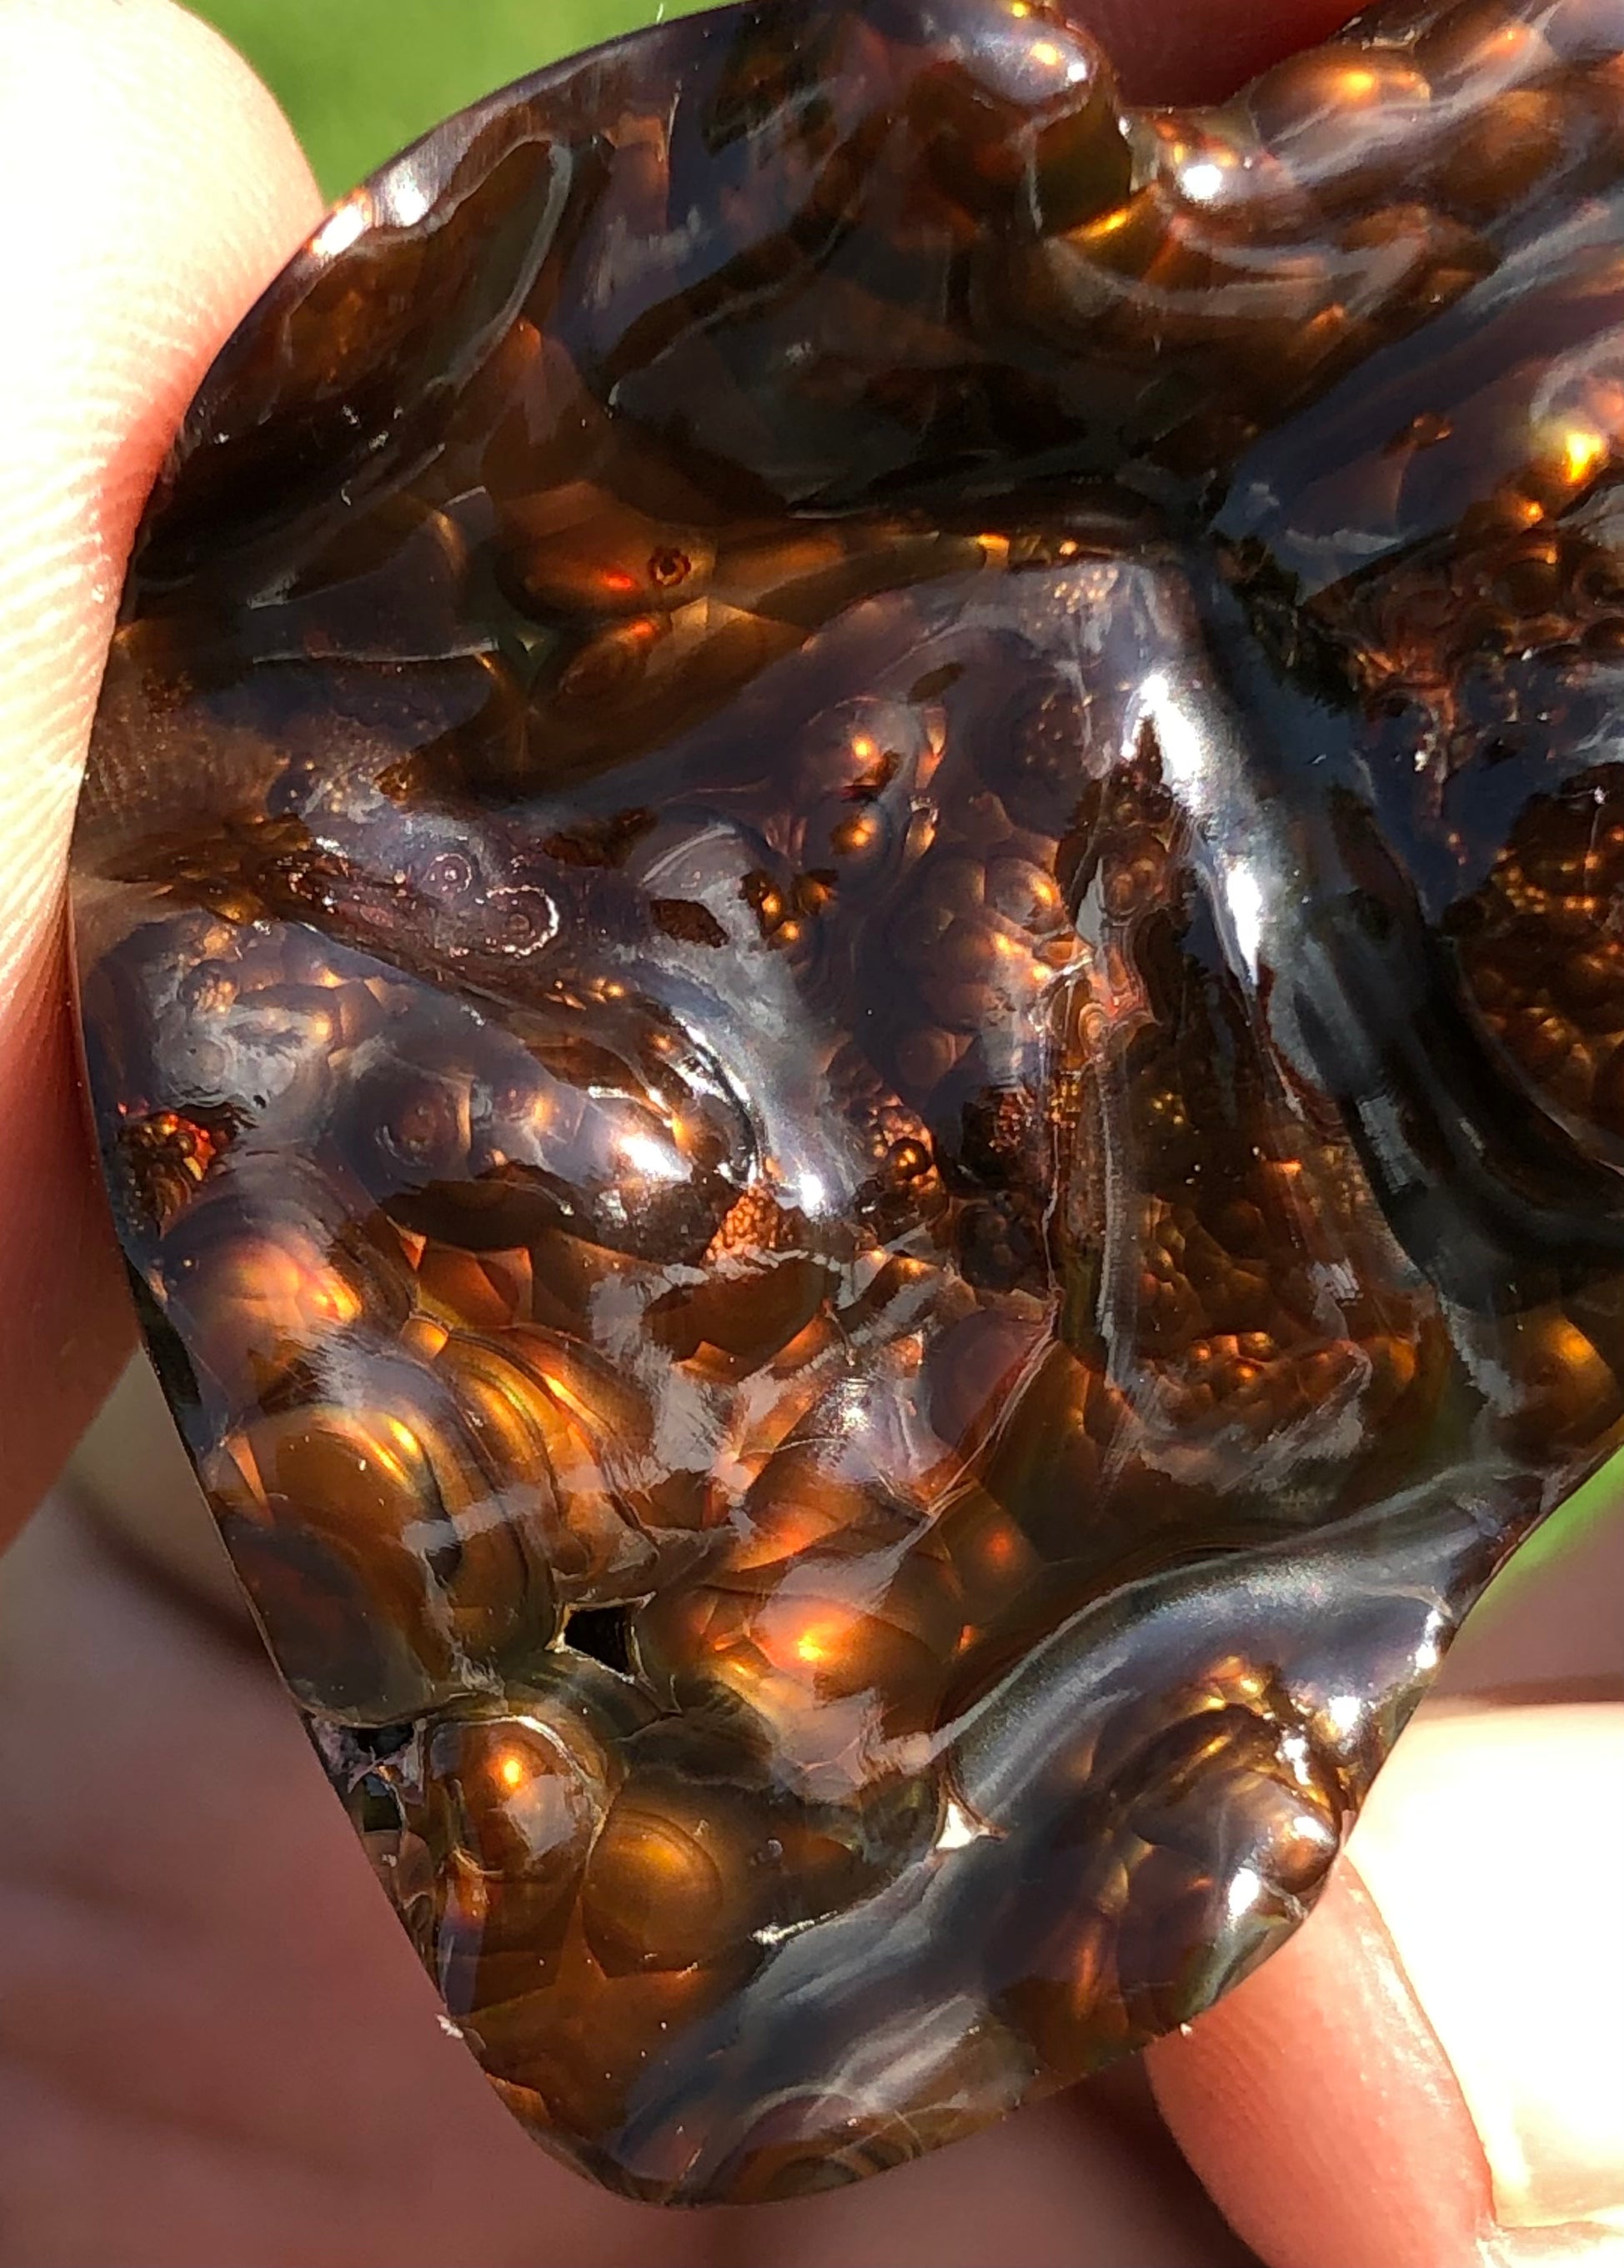 133ct Big Size Rare Fire Agate Carving, Lava Bubbling out of it - Collector Gemstone